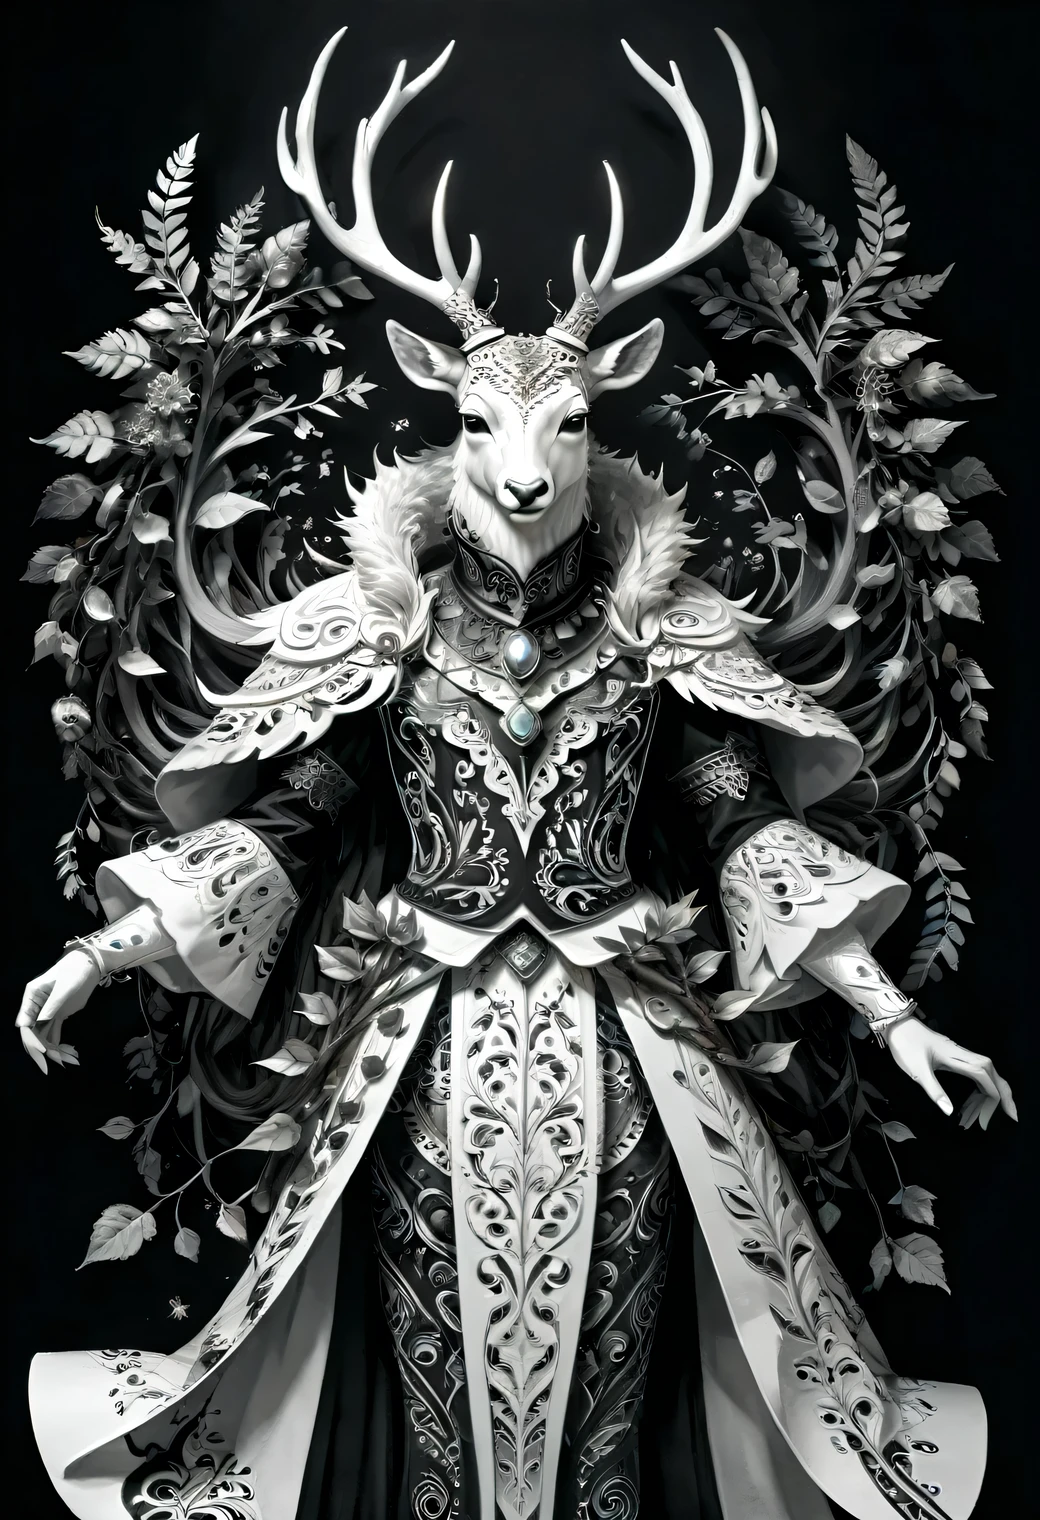 ((Black and white art)), black art, white art, The photo was taken with a Nikon Z 6II camera with a Nikon NIKKOR Z 24-120 mm lens, portrait of a forest deer with spreading unreal horns, deer horns intertwined with branches and stems of surrounding plants of a magical forest, full body, full pose, style, grace, mesmerizing, the work of a master of black and white art, filigree, intricate, depth of volume, illusion in the image, (black and white image):1.6045. 35 mm, f/3, 1/25 sec., ISO 120.